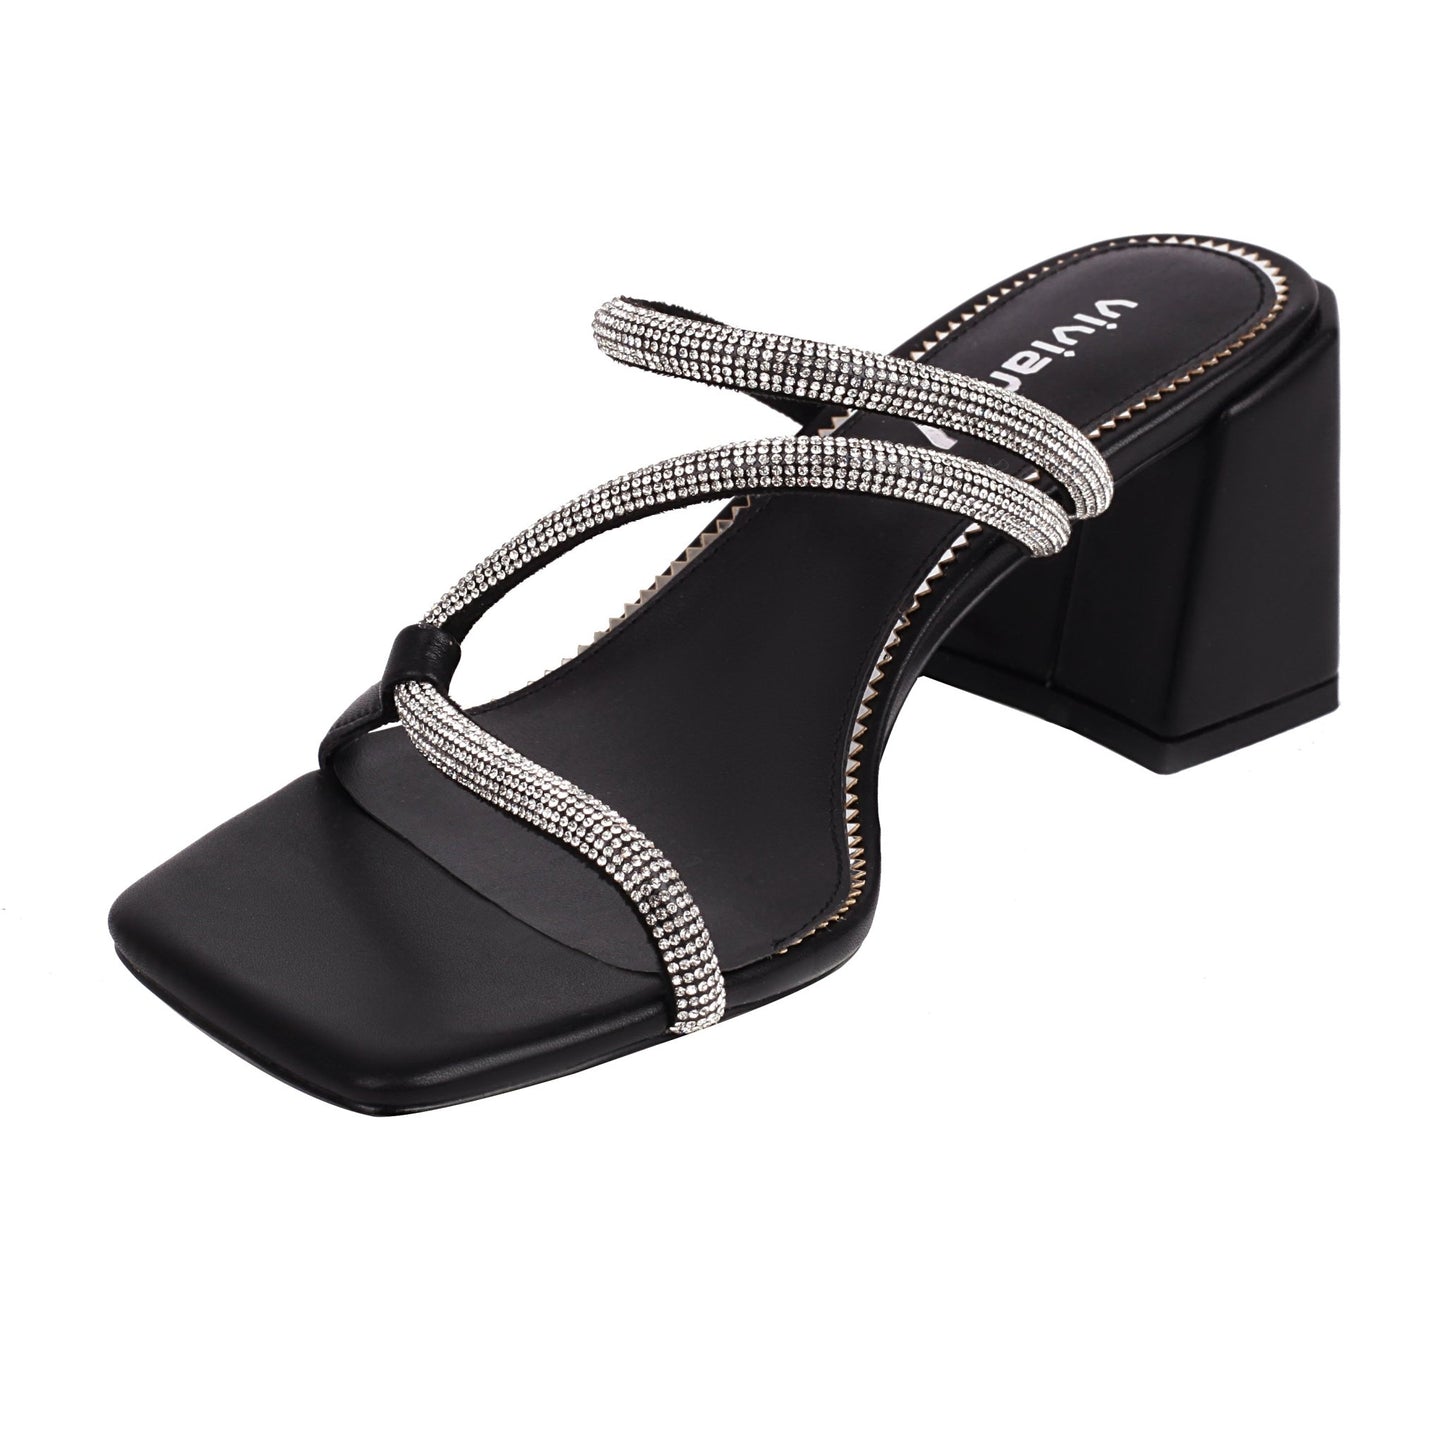 Luciana 69 Clear Sandals - Vivianly Shoes - chunky heels